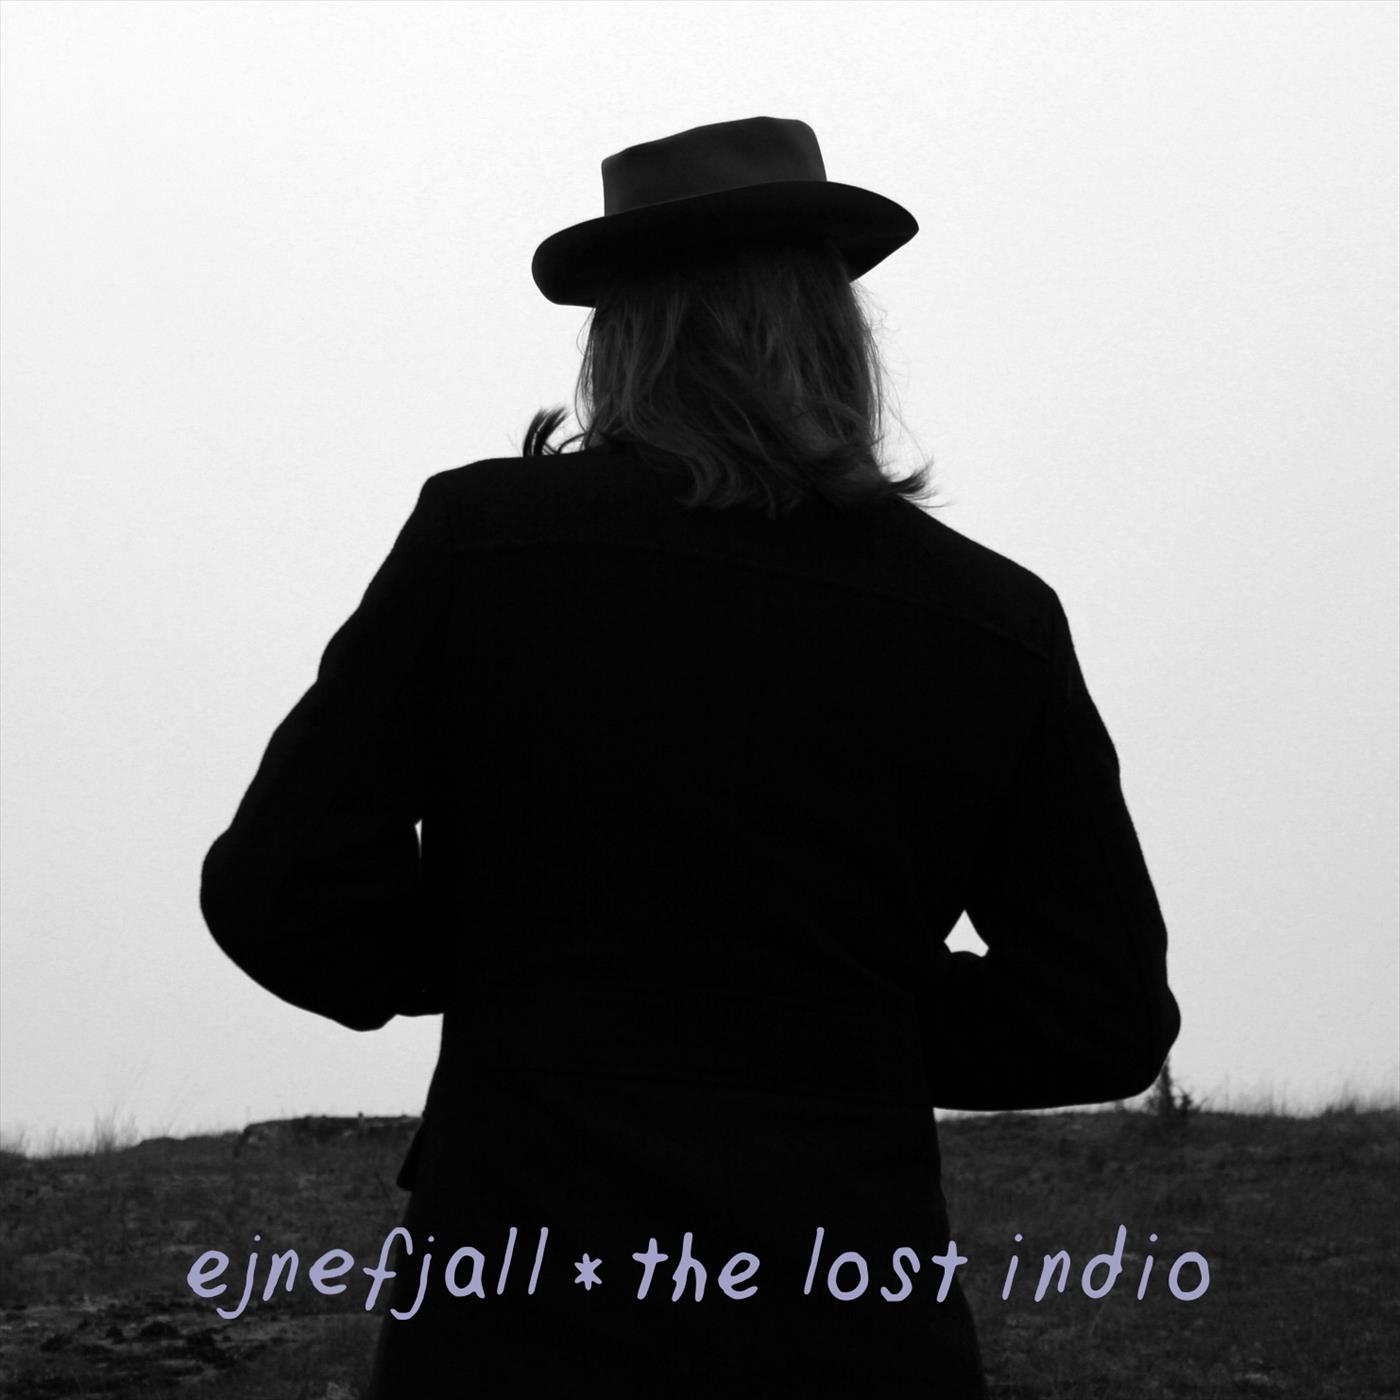 The lost Indio